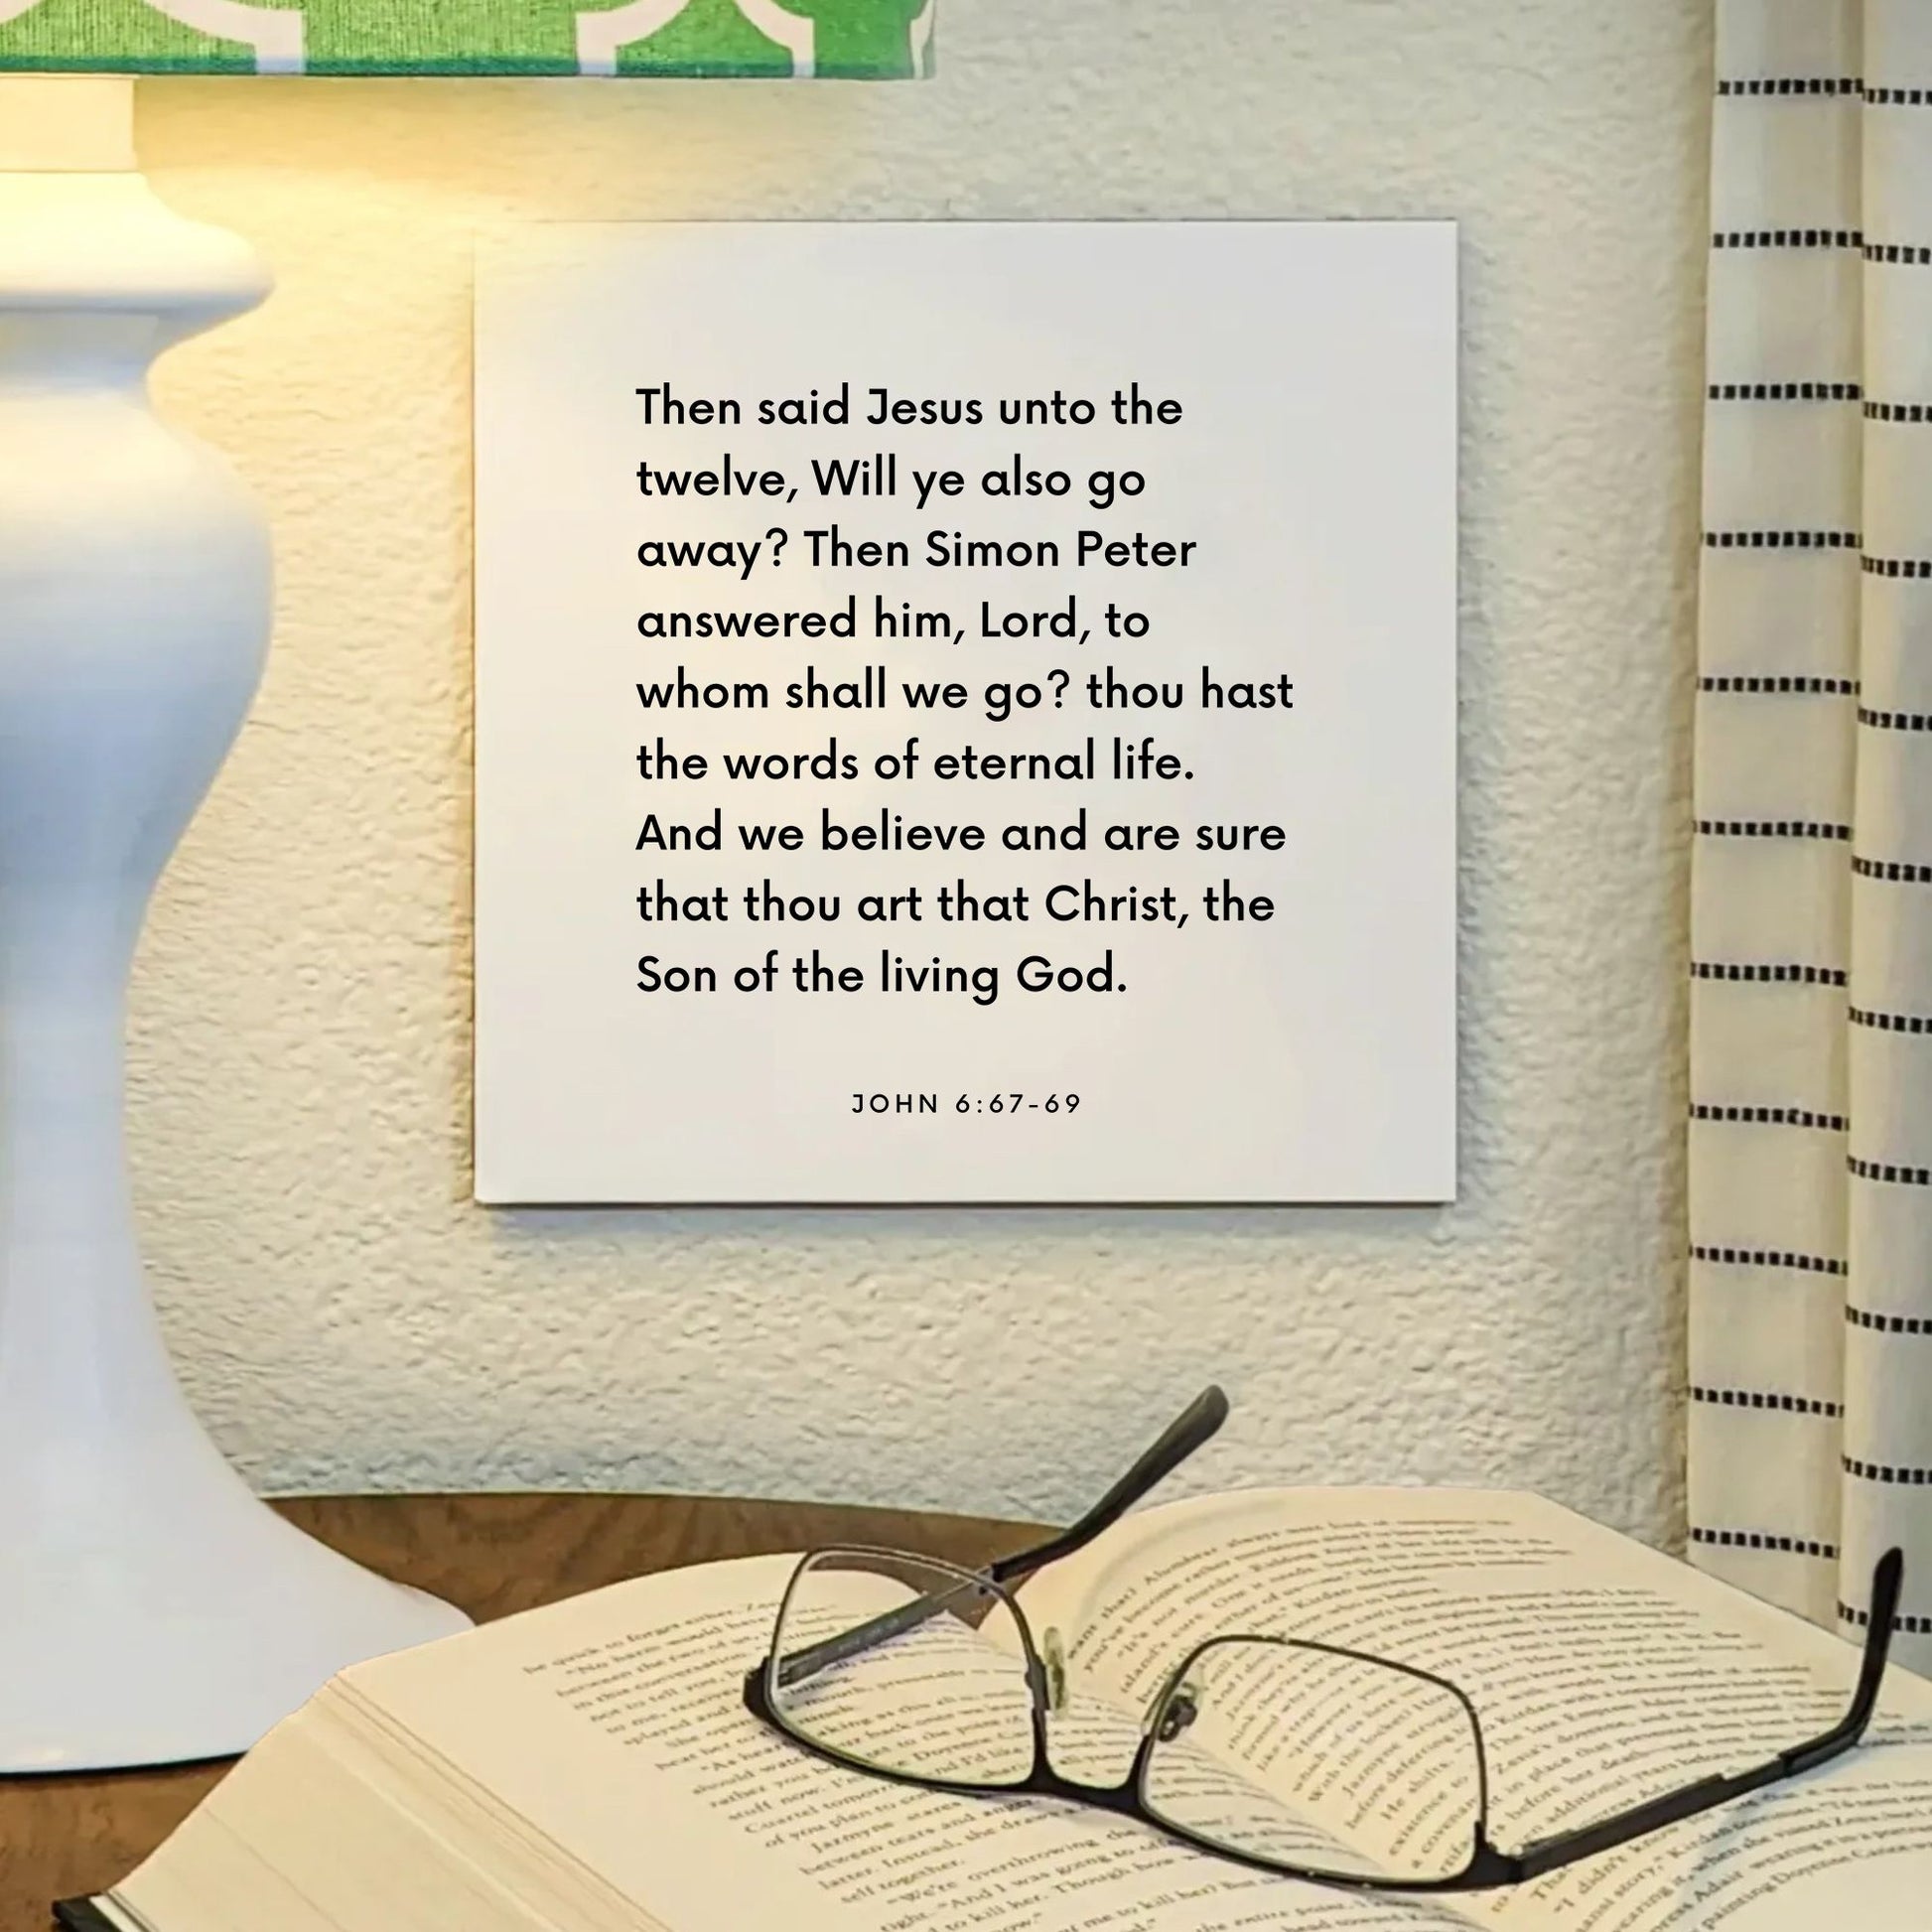 Lamp mouting of the scripture tile for John 6:67-69 - "Lord, to whom shall we go? thou hast the words of eternal life"